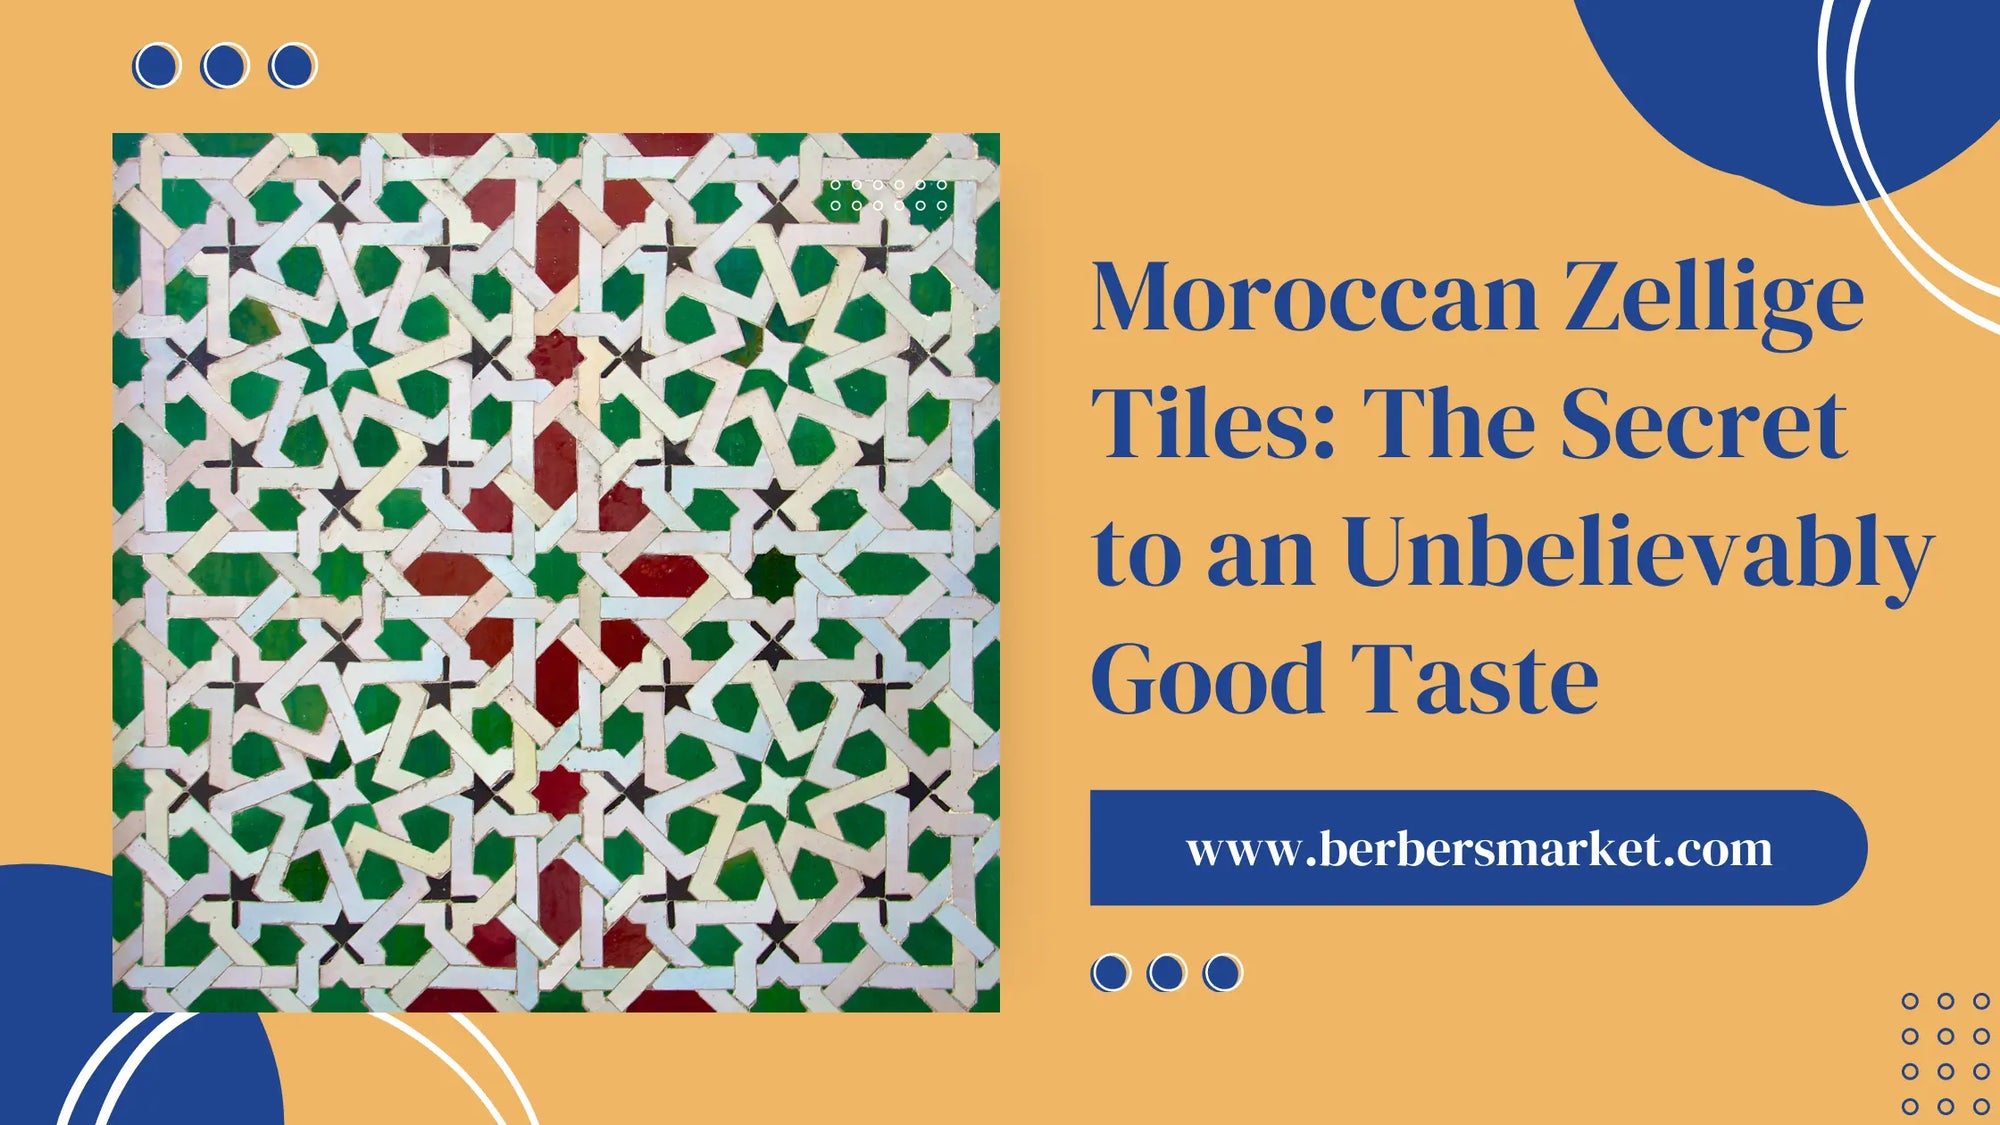 Blog banner talking about: "Moroccan Zellige Tiles: The Secret to an Unbelievably Good Taste" with a picture showing a colored-intricate-geometric-pattern-of-handmade-moroccan-zellige